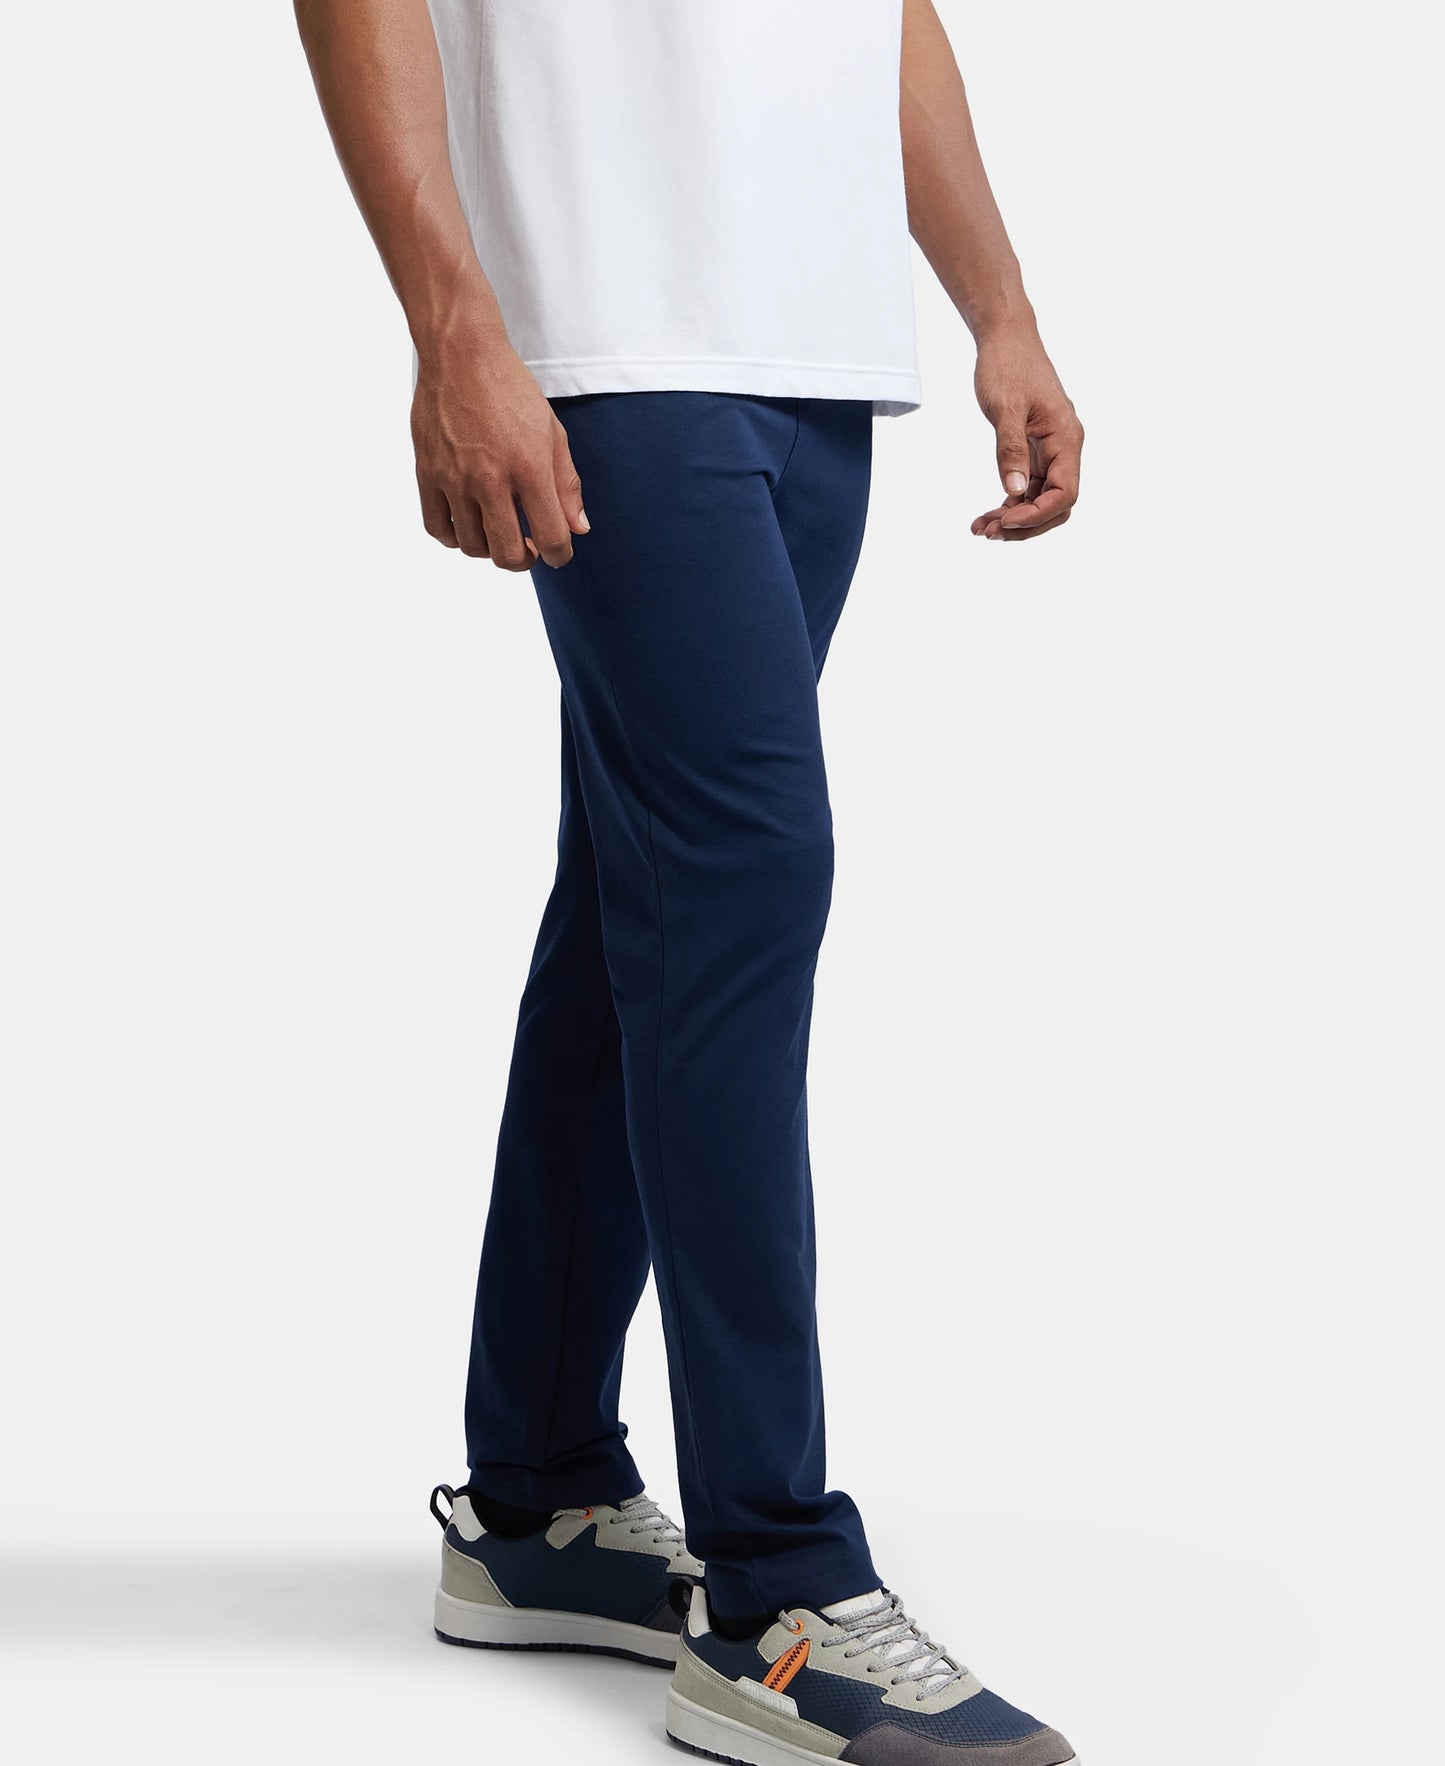 Super Combed Cotton Rich Slim Fit Trackpants with Side and Zipper Media Pockets  - Navy-5